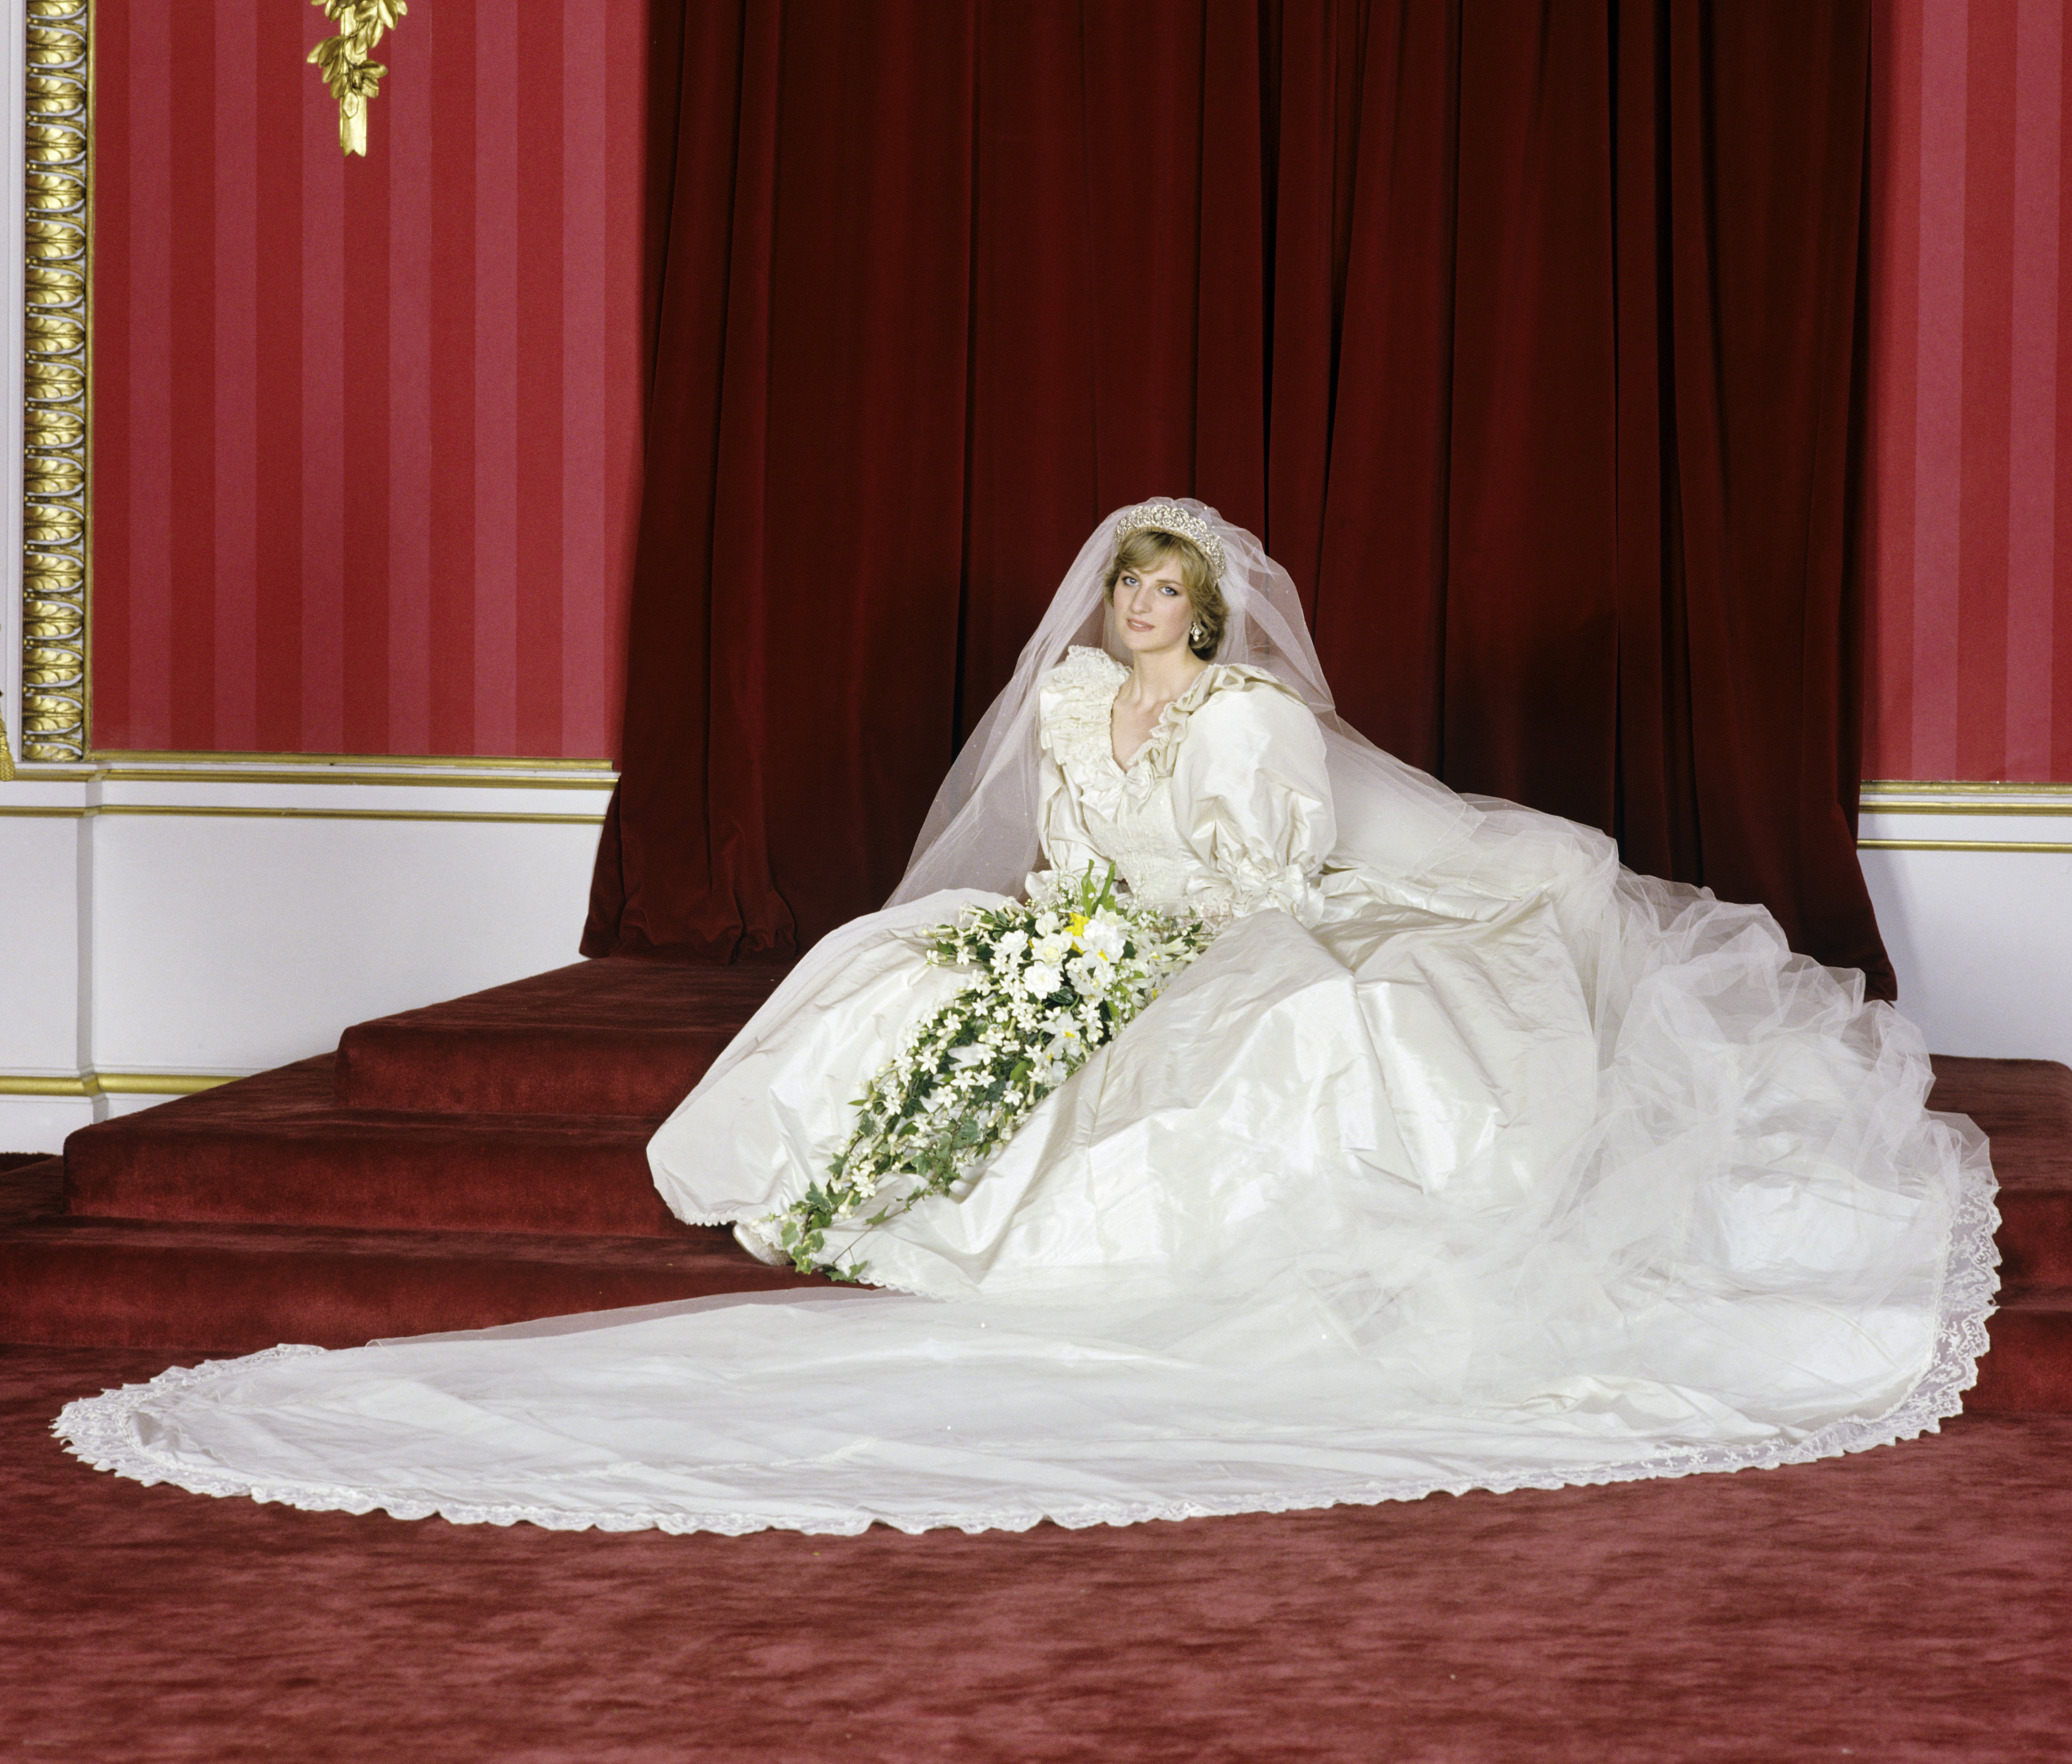 Diana, Princess of Wales in the Throne Room at Buckingham Palace after her wedding on 29th July 1981 | Source: Getty Images 